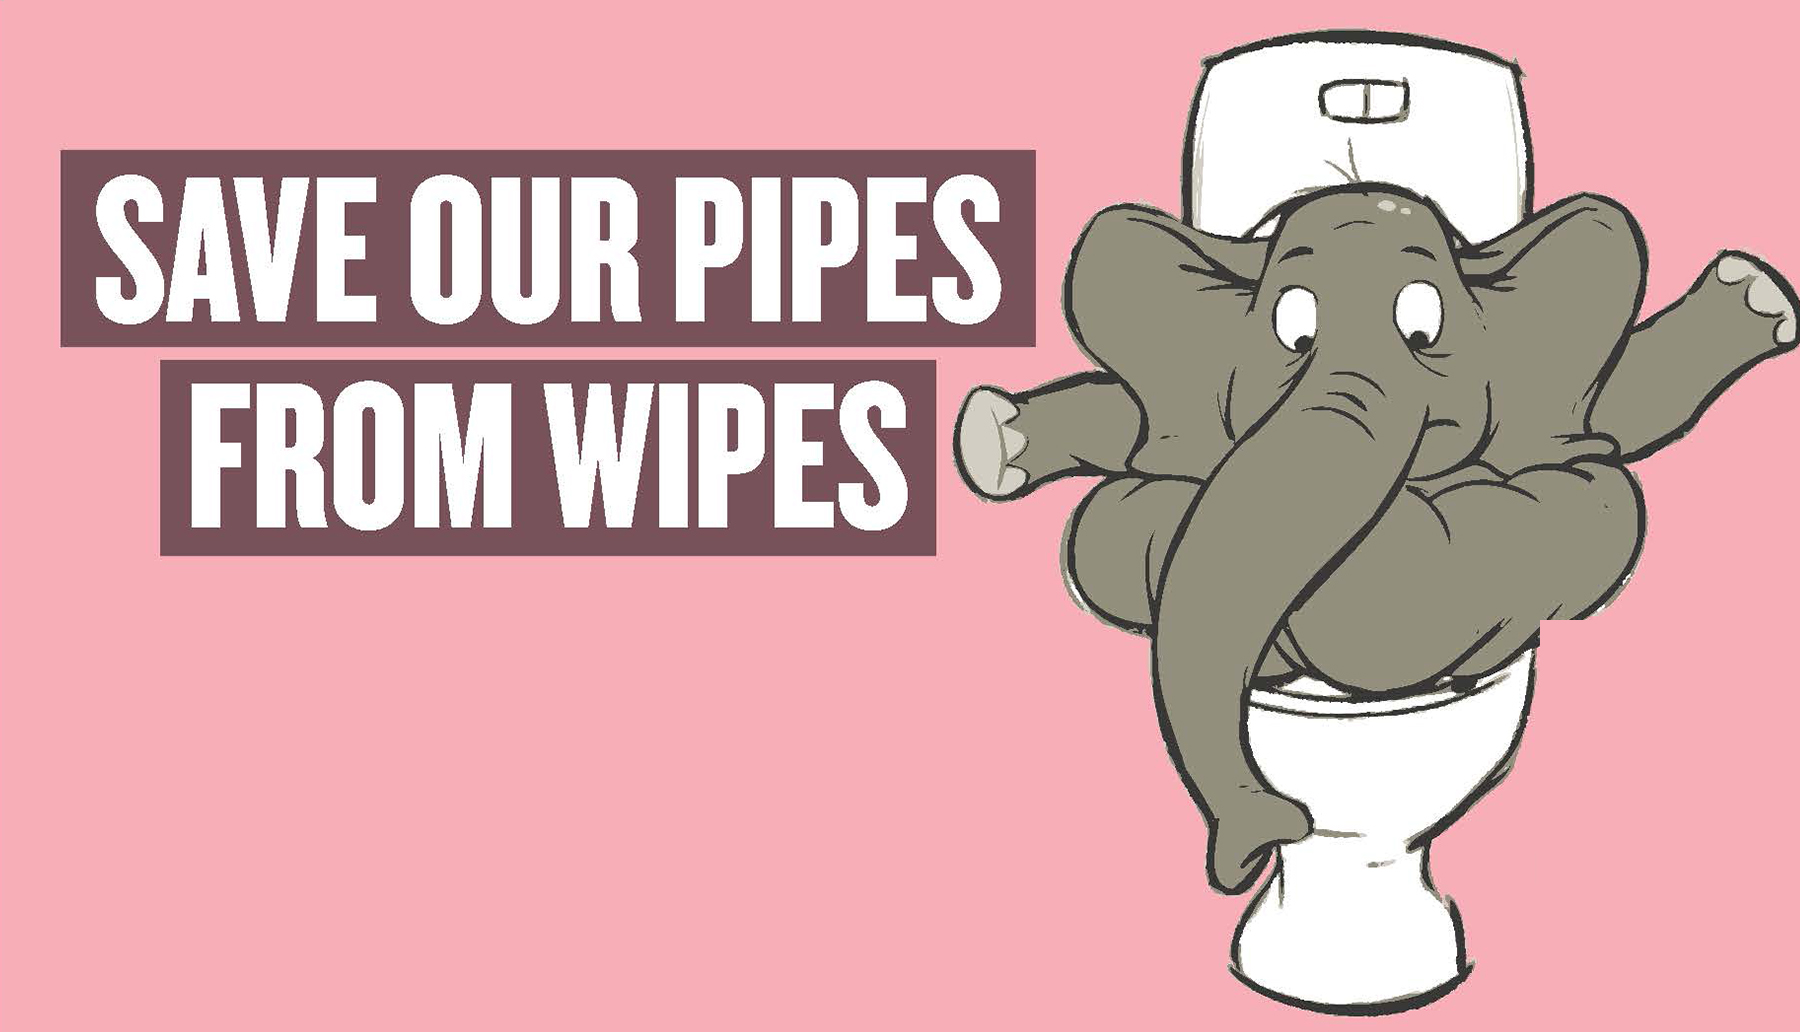 Save our pipes from wipes graphic